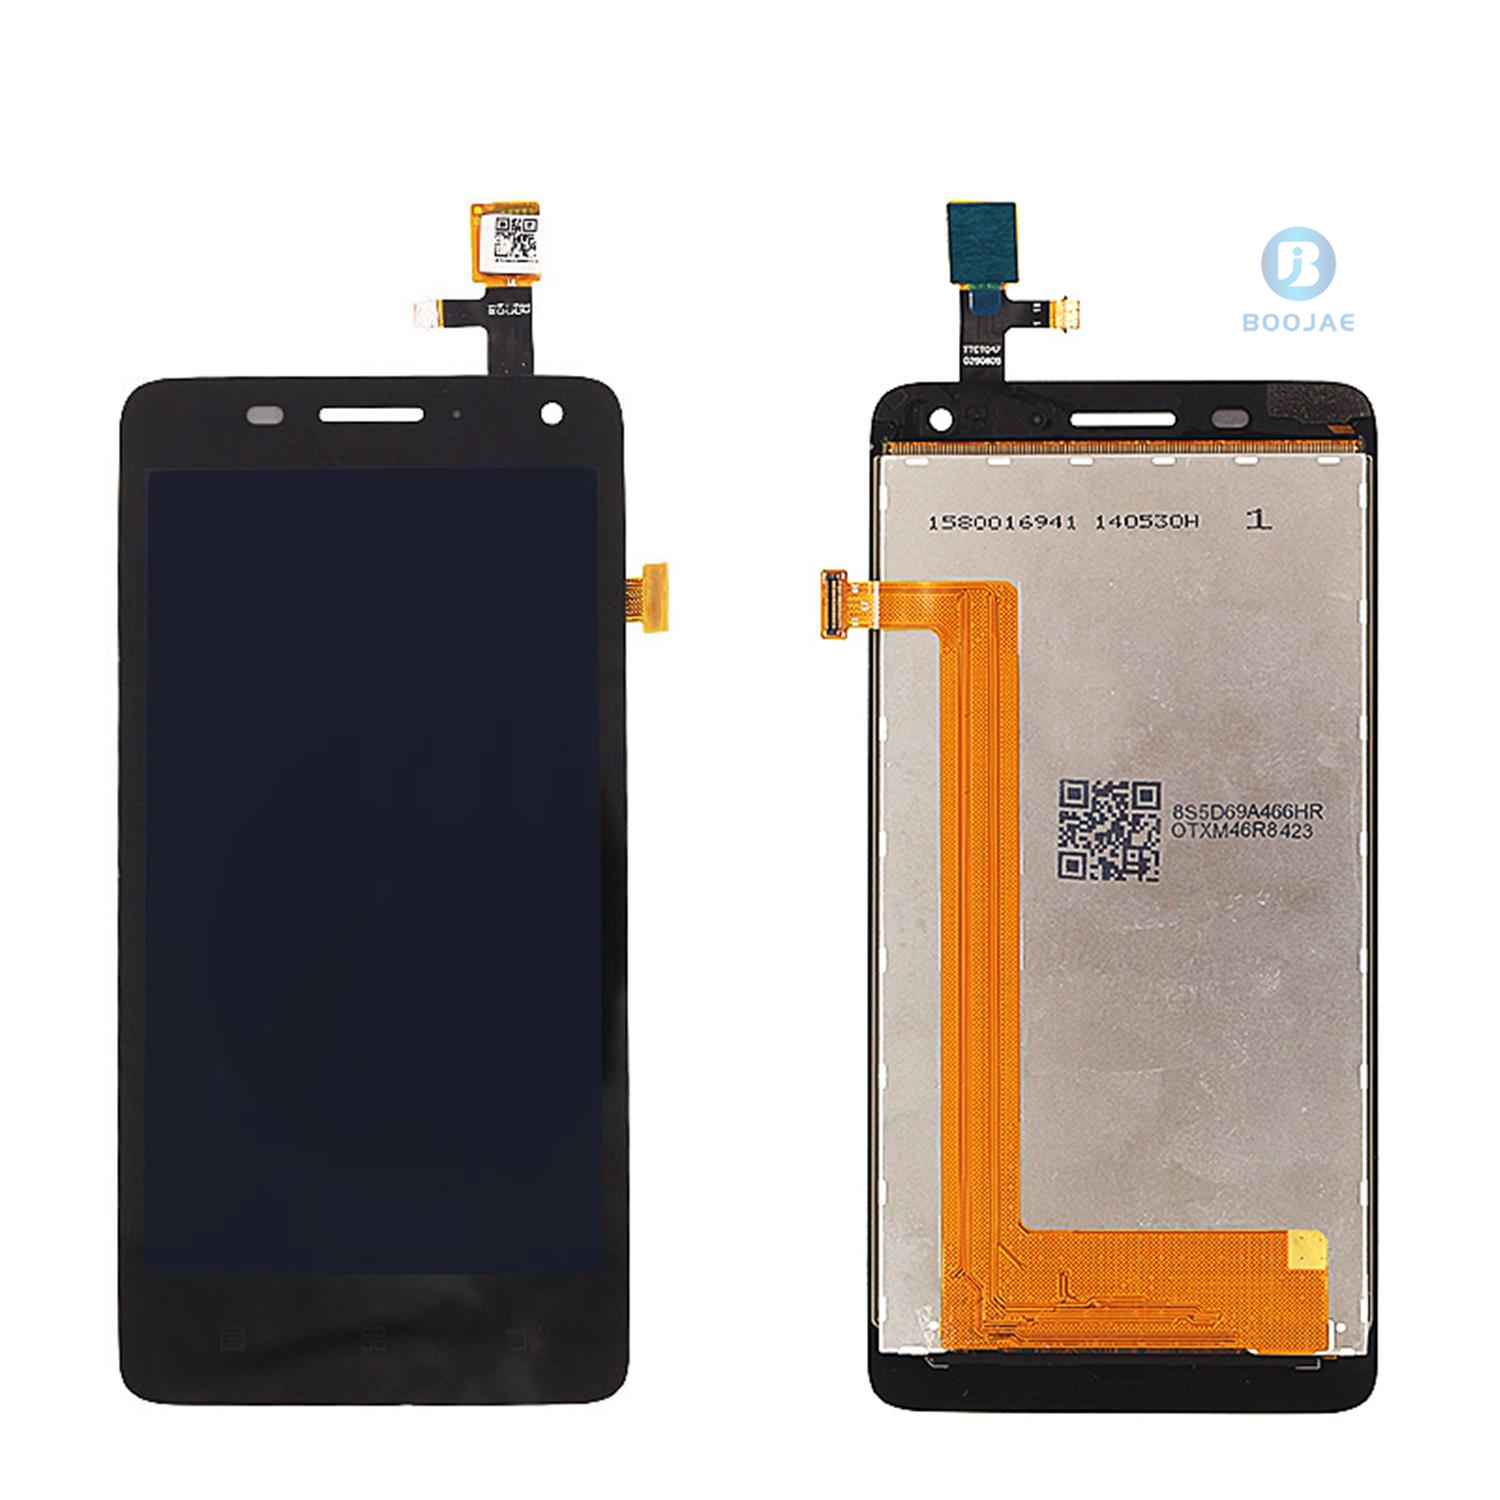 For Lenovo S660 LCD Screen Display and Touch Panel Digitizer Assembly Replacement